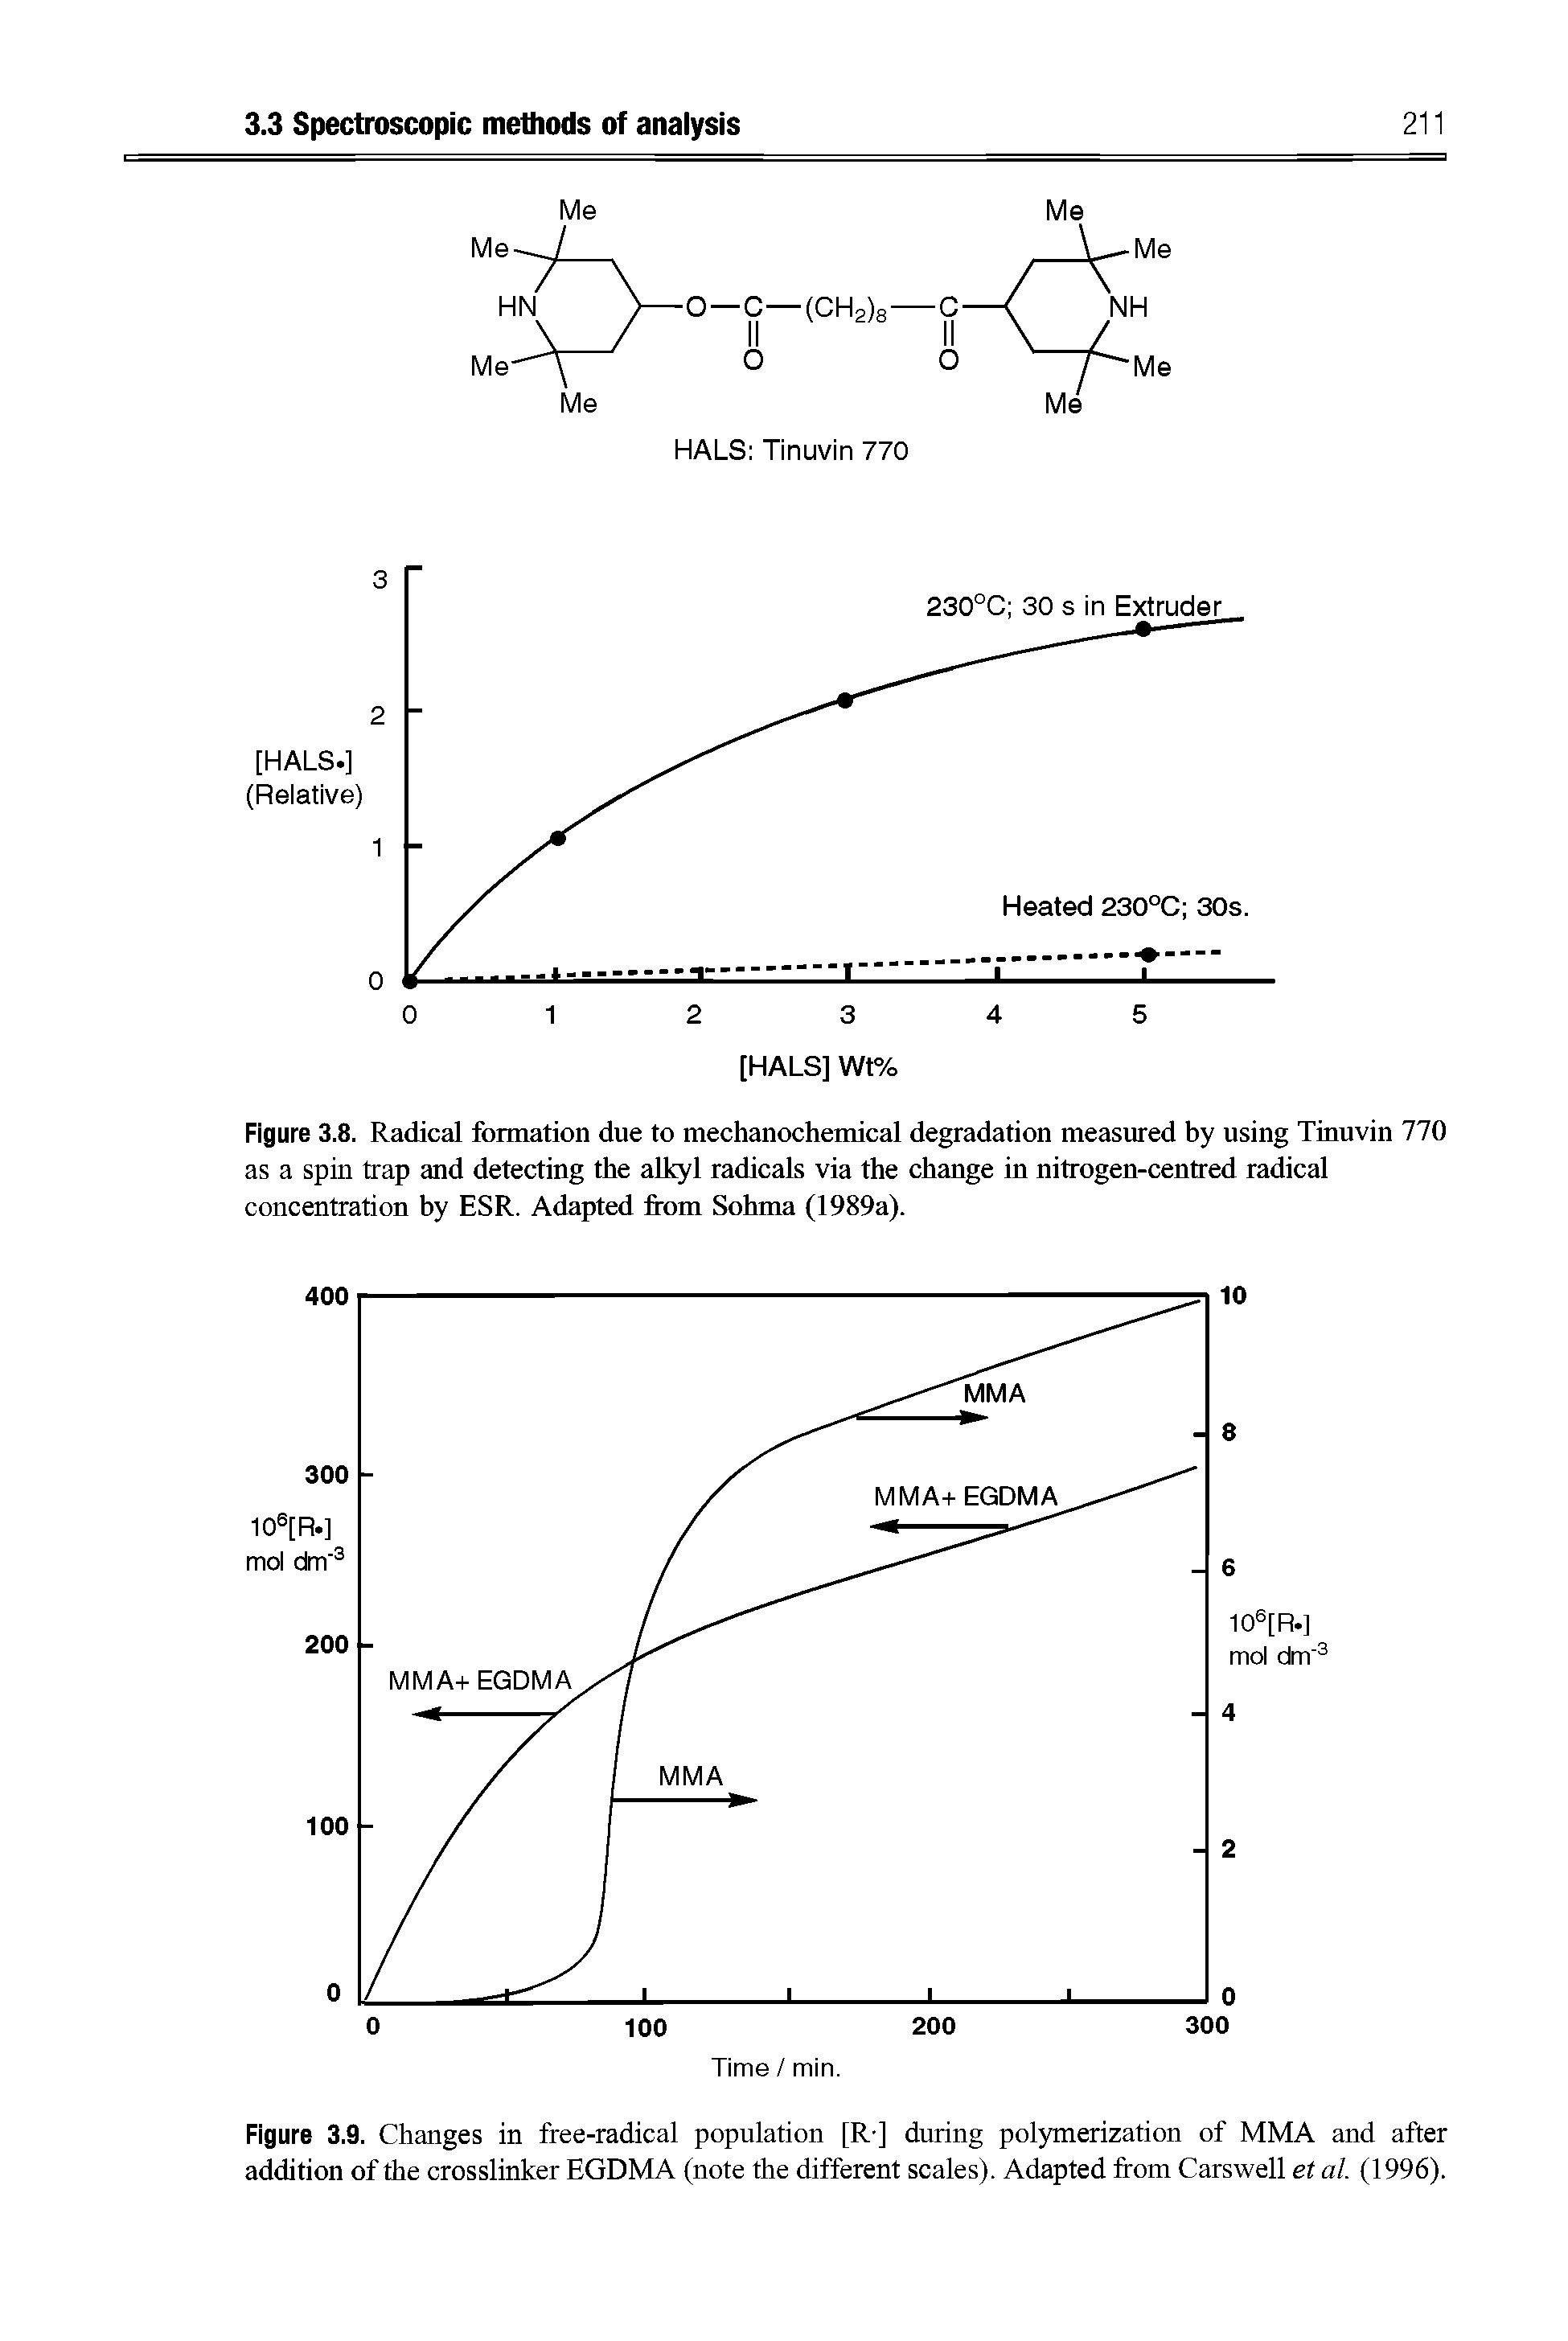 Figure 3.8. Radical formation due to mechanochemical degradation measured by using Tinuvin 770 as a spin trap and detecting the alkyl radicals via the change in nitrogen-centred radical concentration by ESR. Adapted from Sohma (1989a).